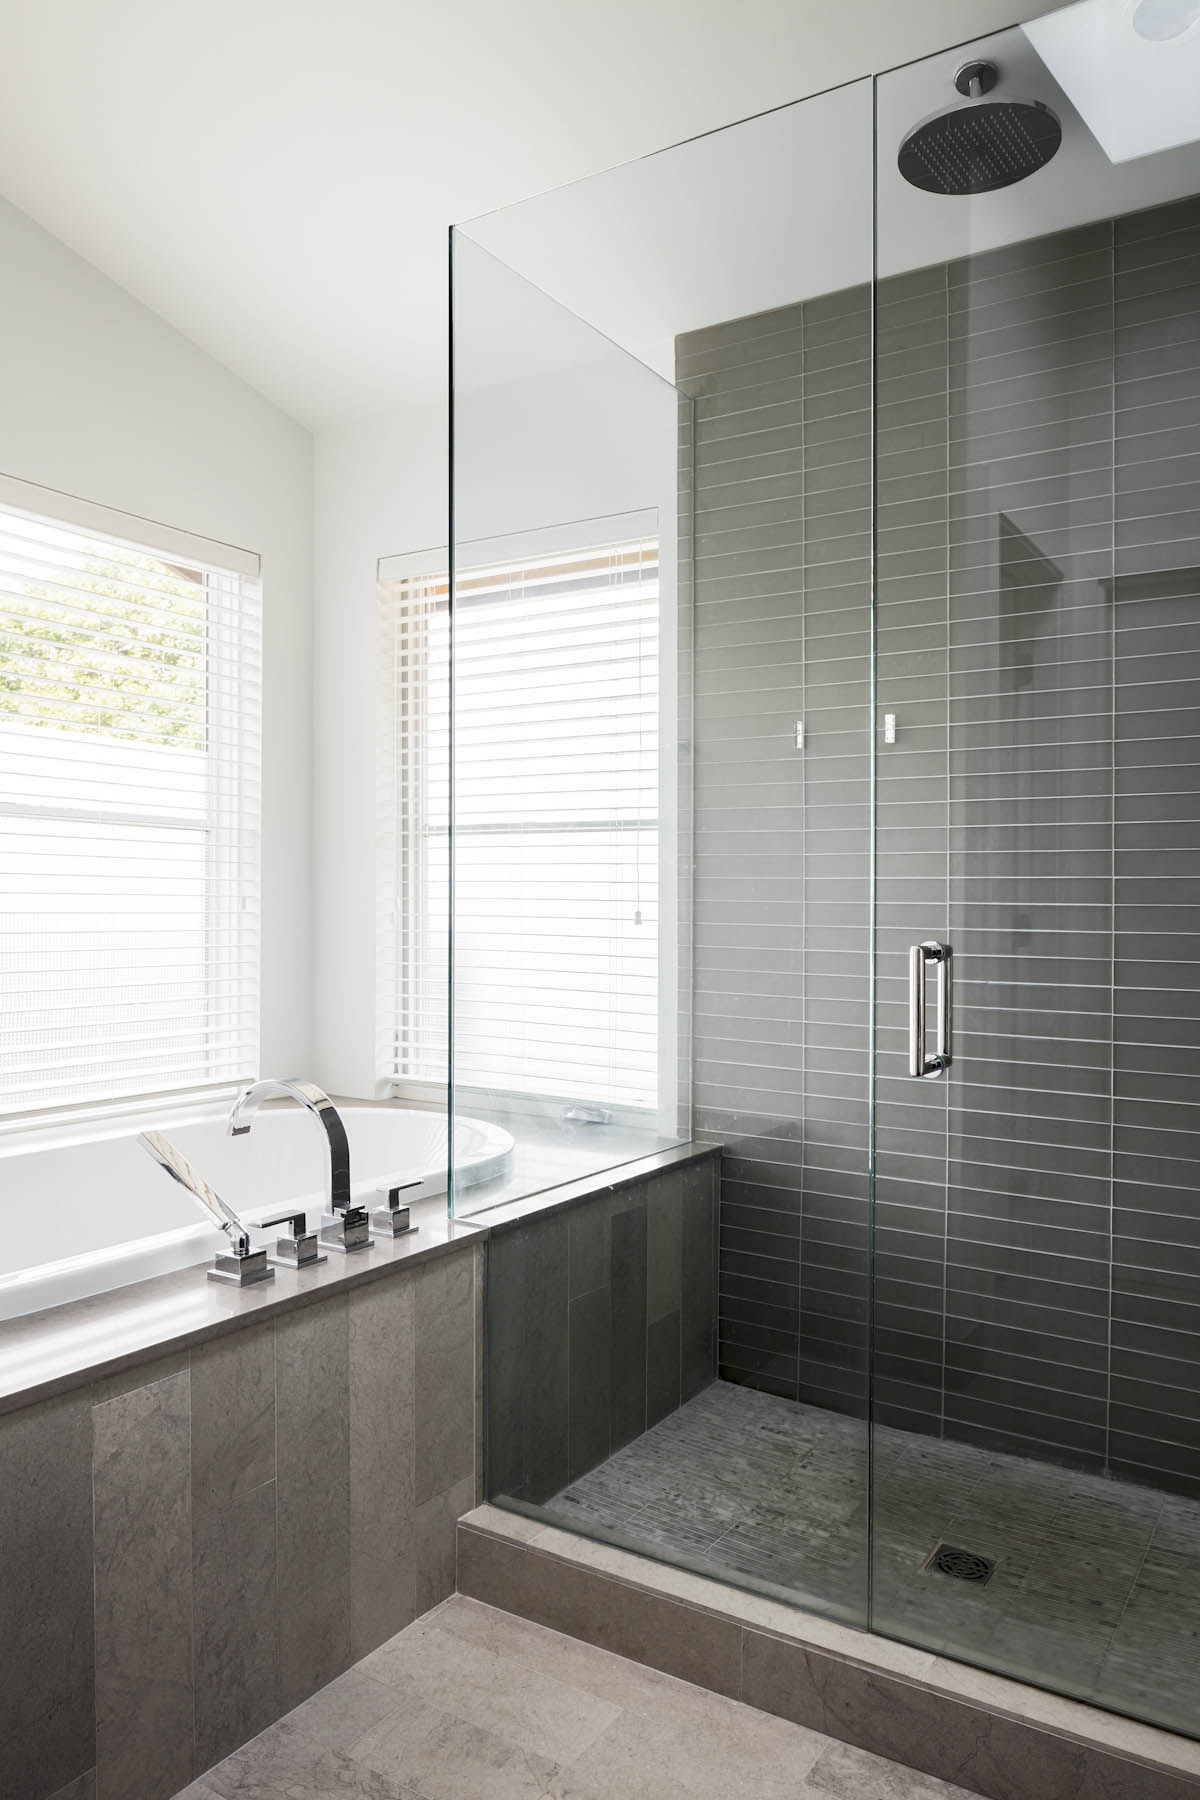 Spacious shower and bathtub with a modern design at the Cambie Corridor custom house.